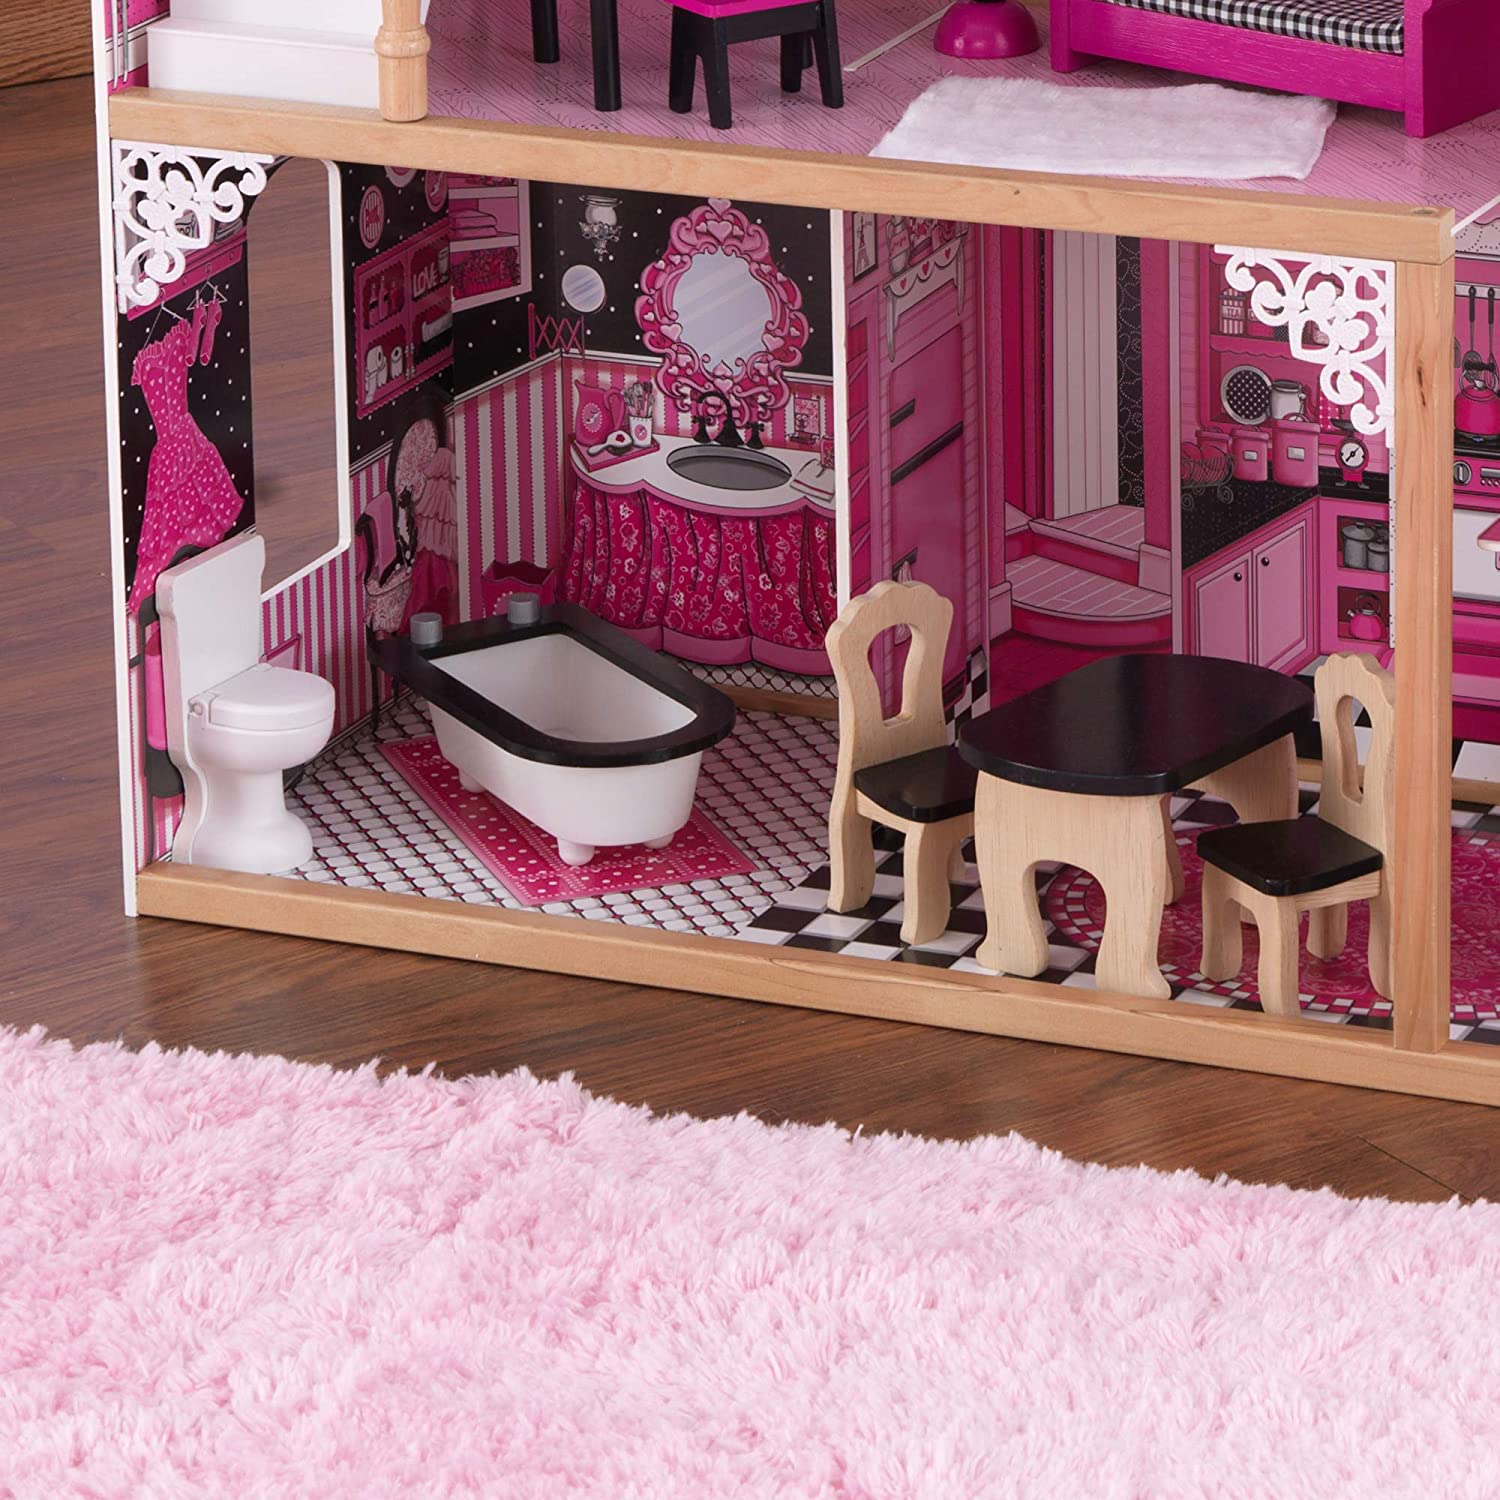 Dollhouse with Furniture for kids 120 x 83 x 40 cm (Model 6) - image9